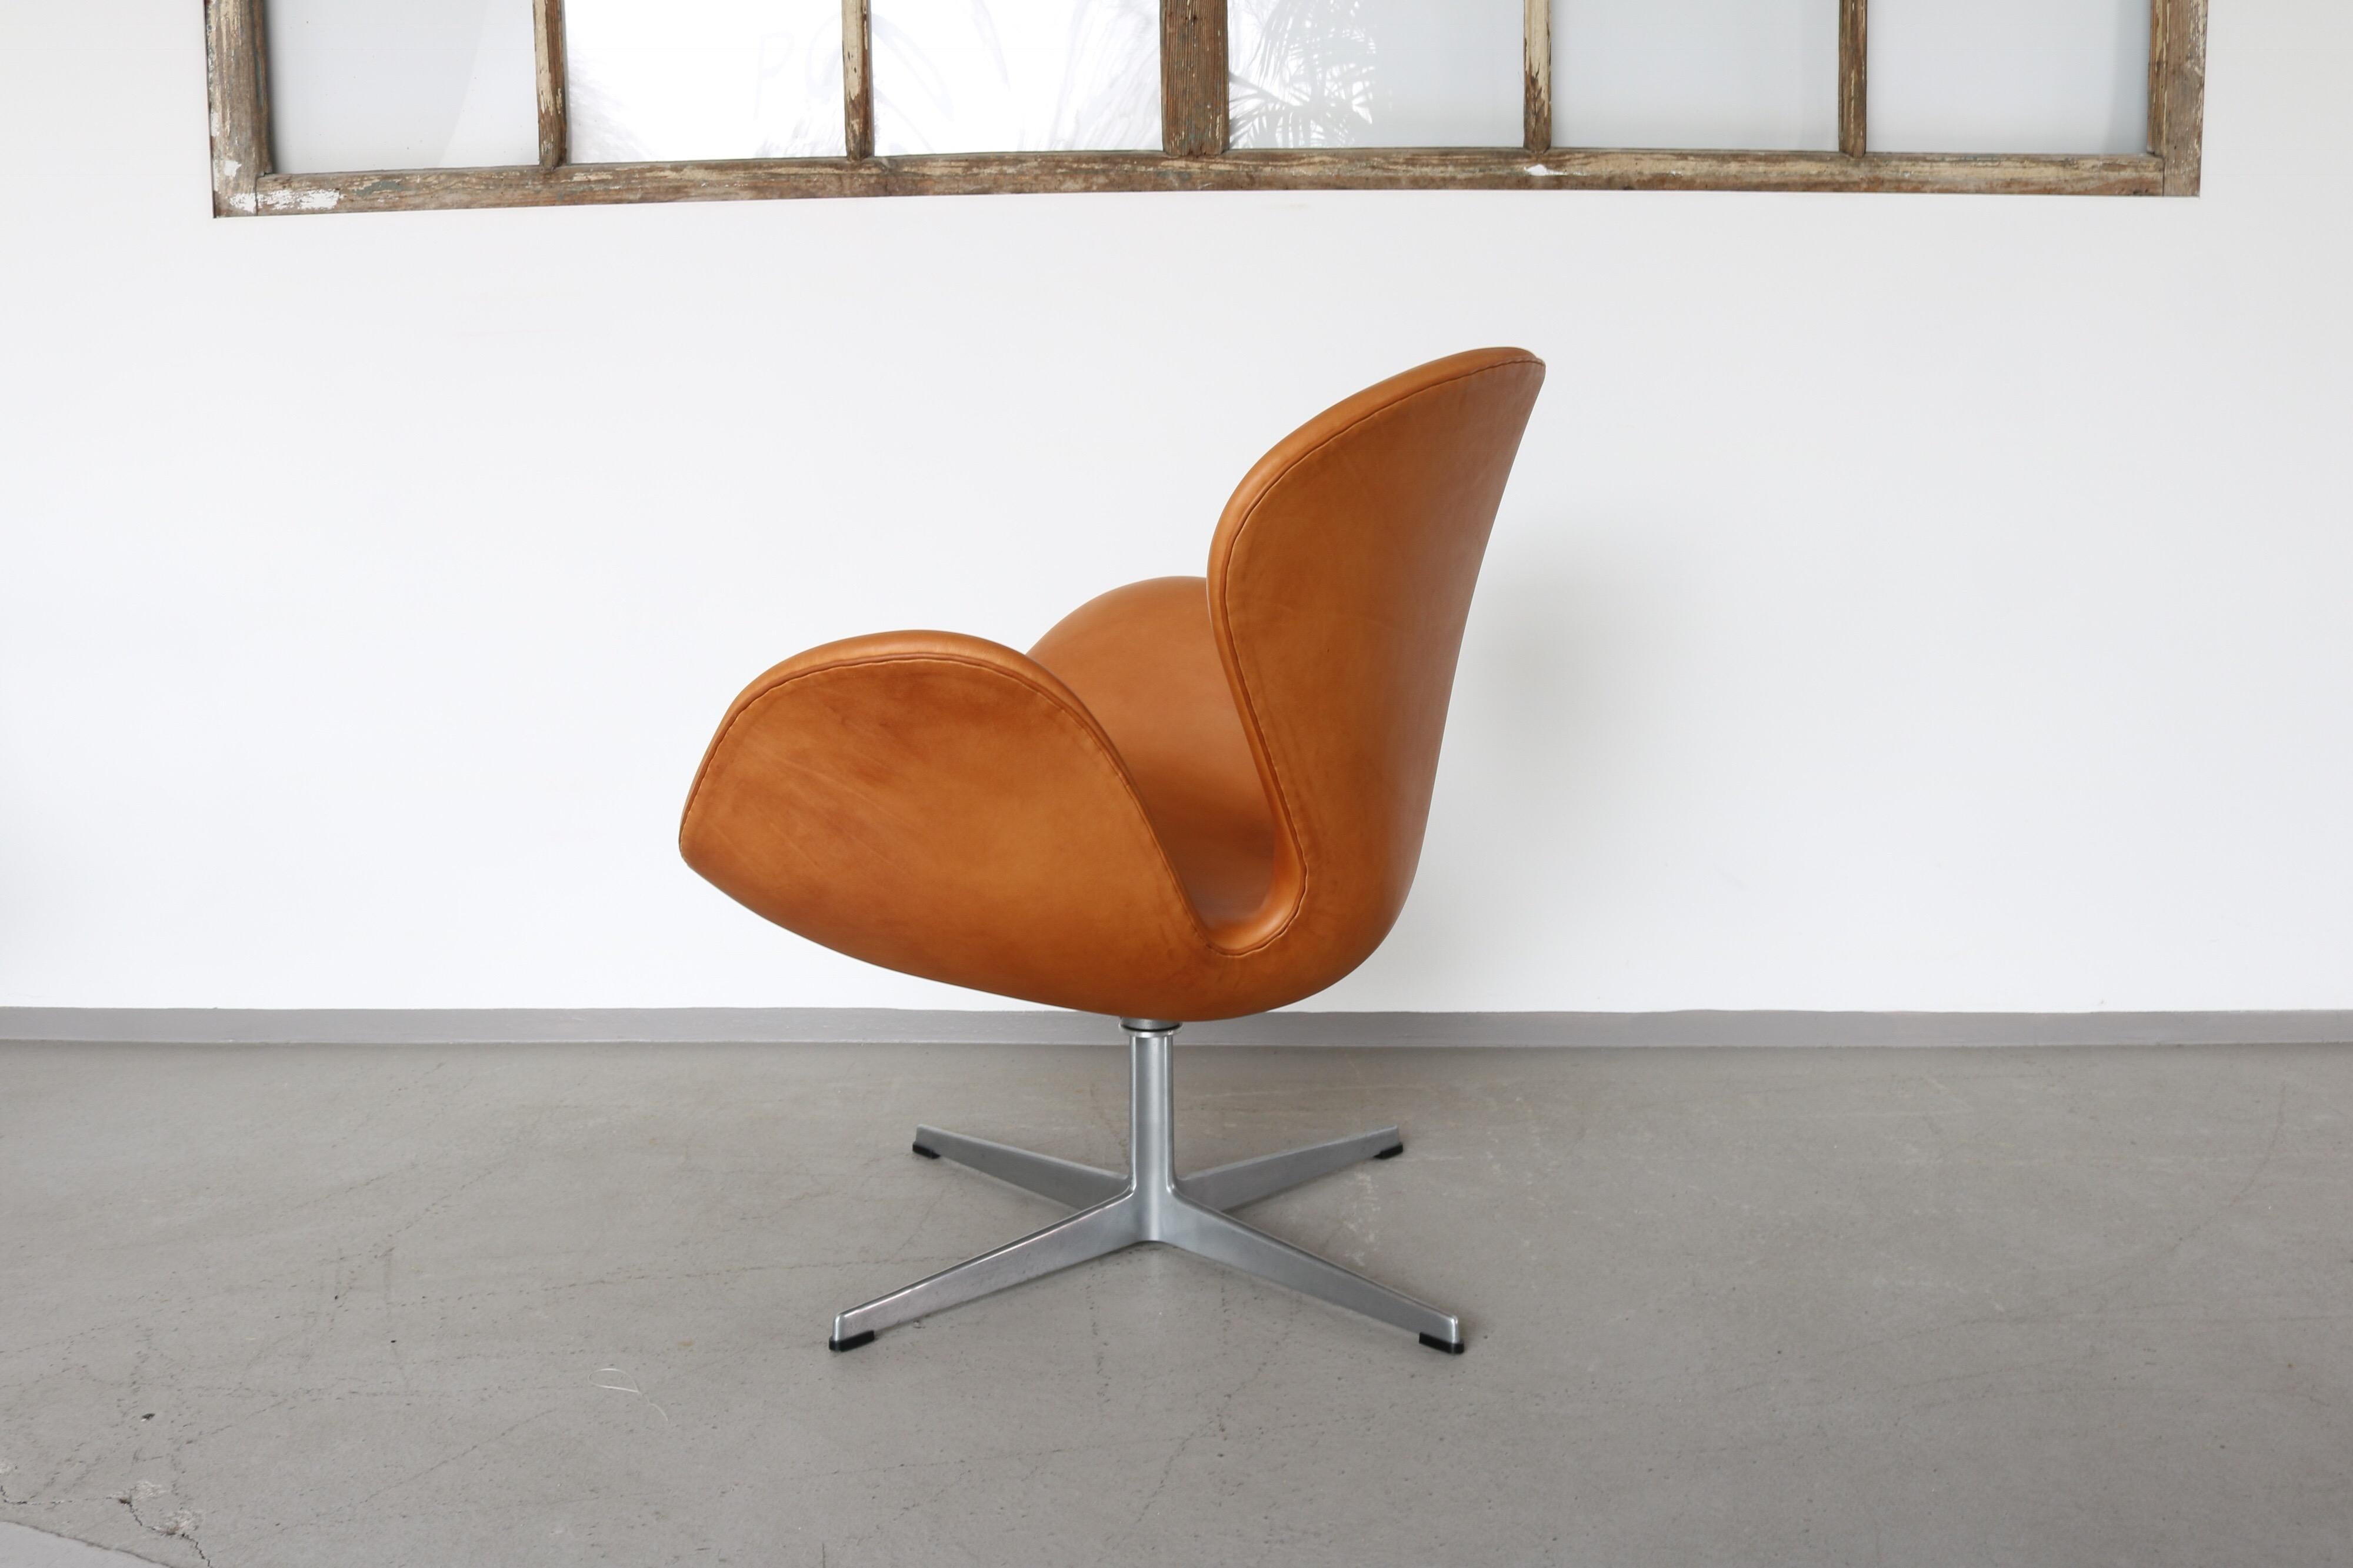 Mid-20th Century Vintage Cognac Leather Swan Chair by Arne Jacobsen for Fritz Hansen